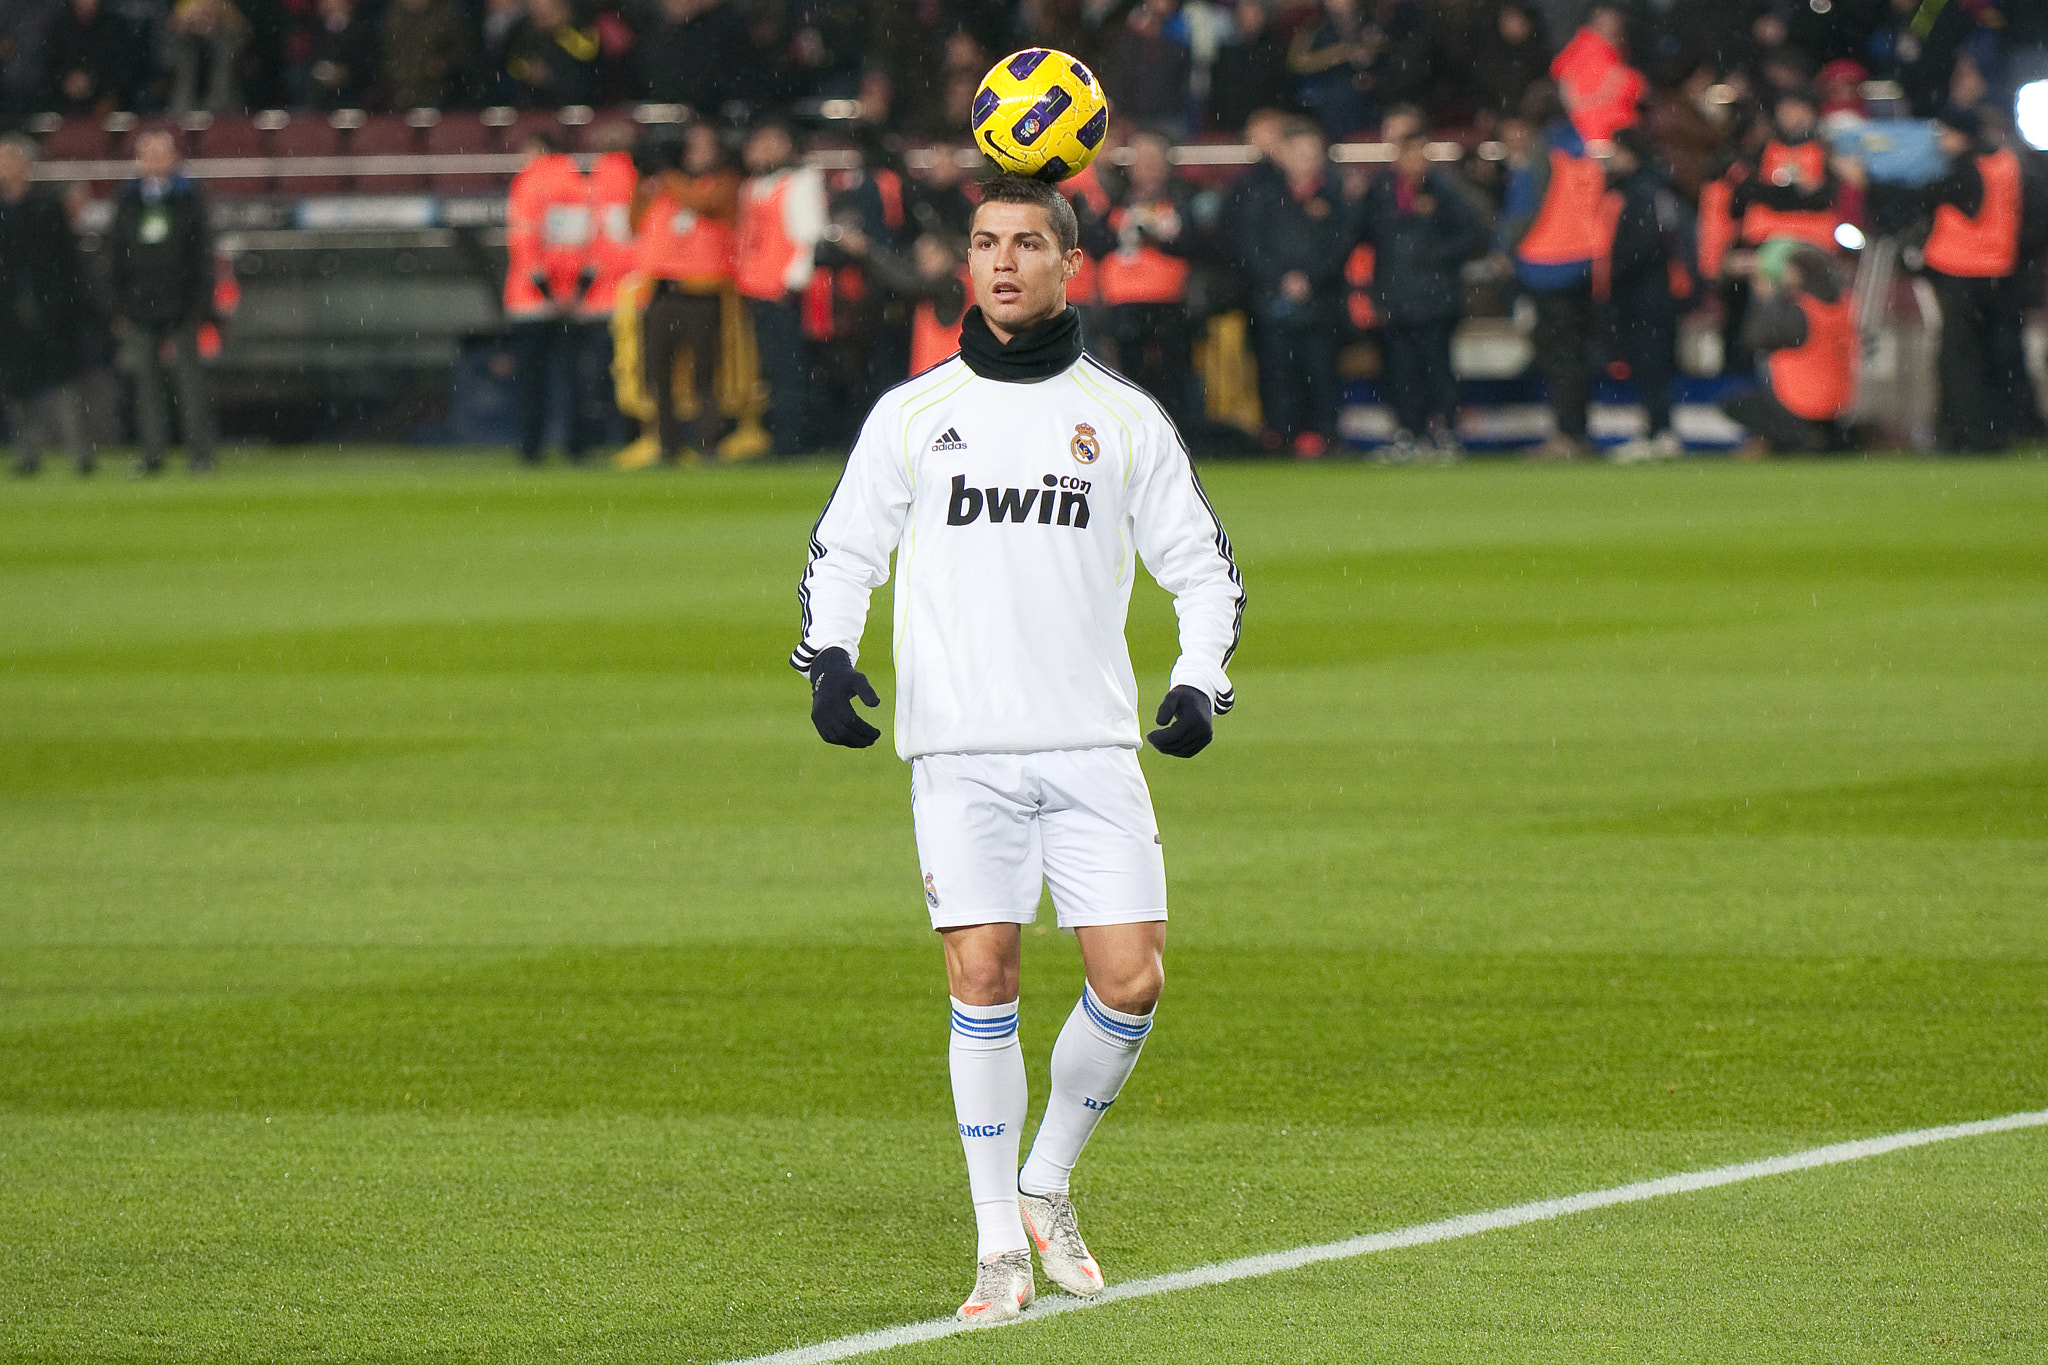 Cristiano Ronaldo plays with the ball